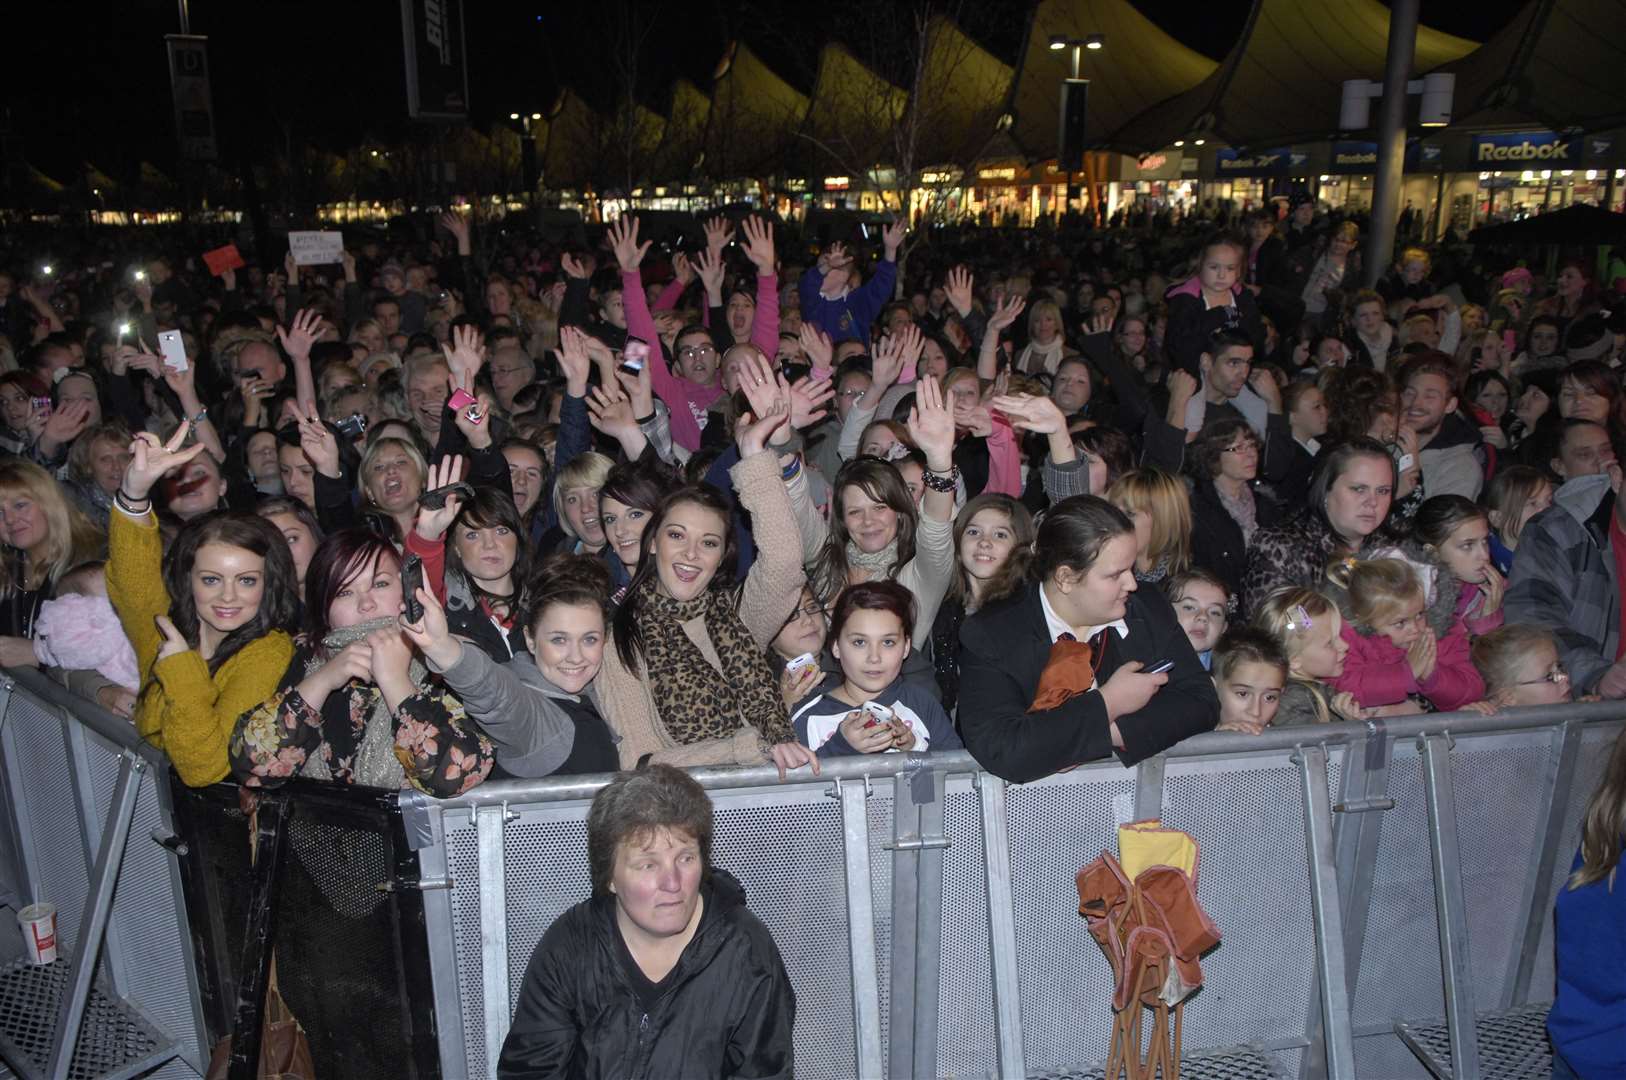 More than 5,000 people packed into centre in November 2011 to catch a glimpse of Peter Andre